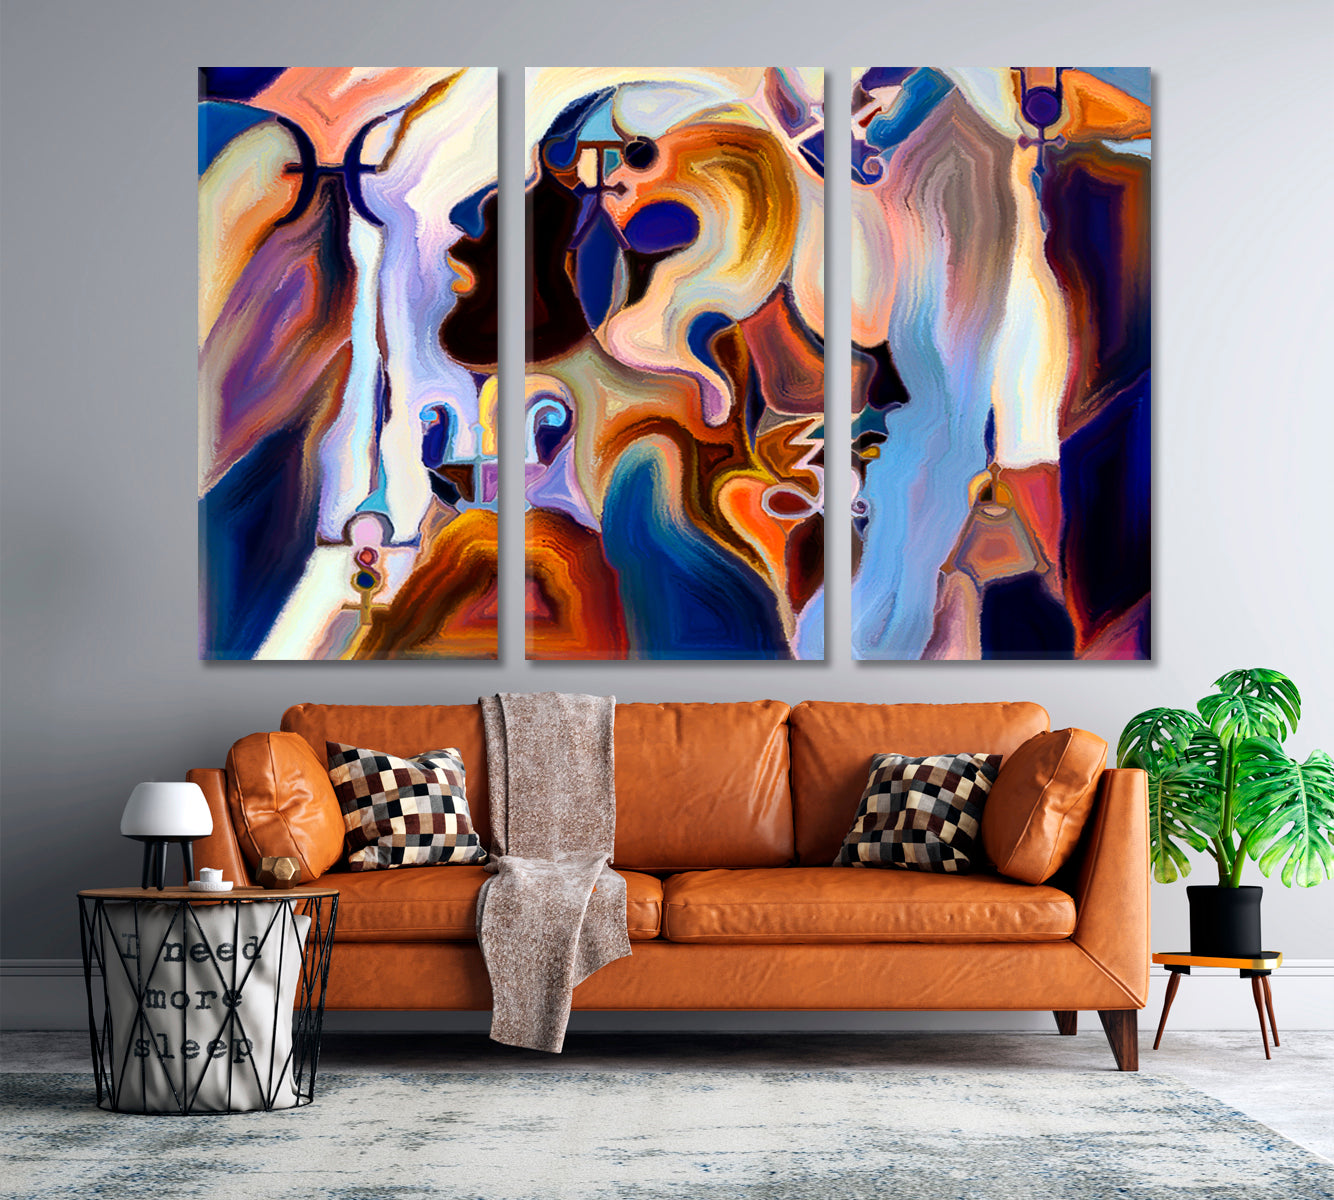 Chasing the Dream Abstract Art Print Artesty 3 panels 36" x 24" 